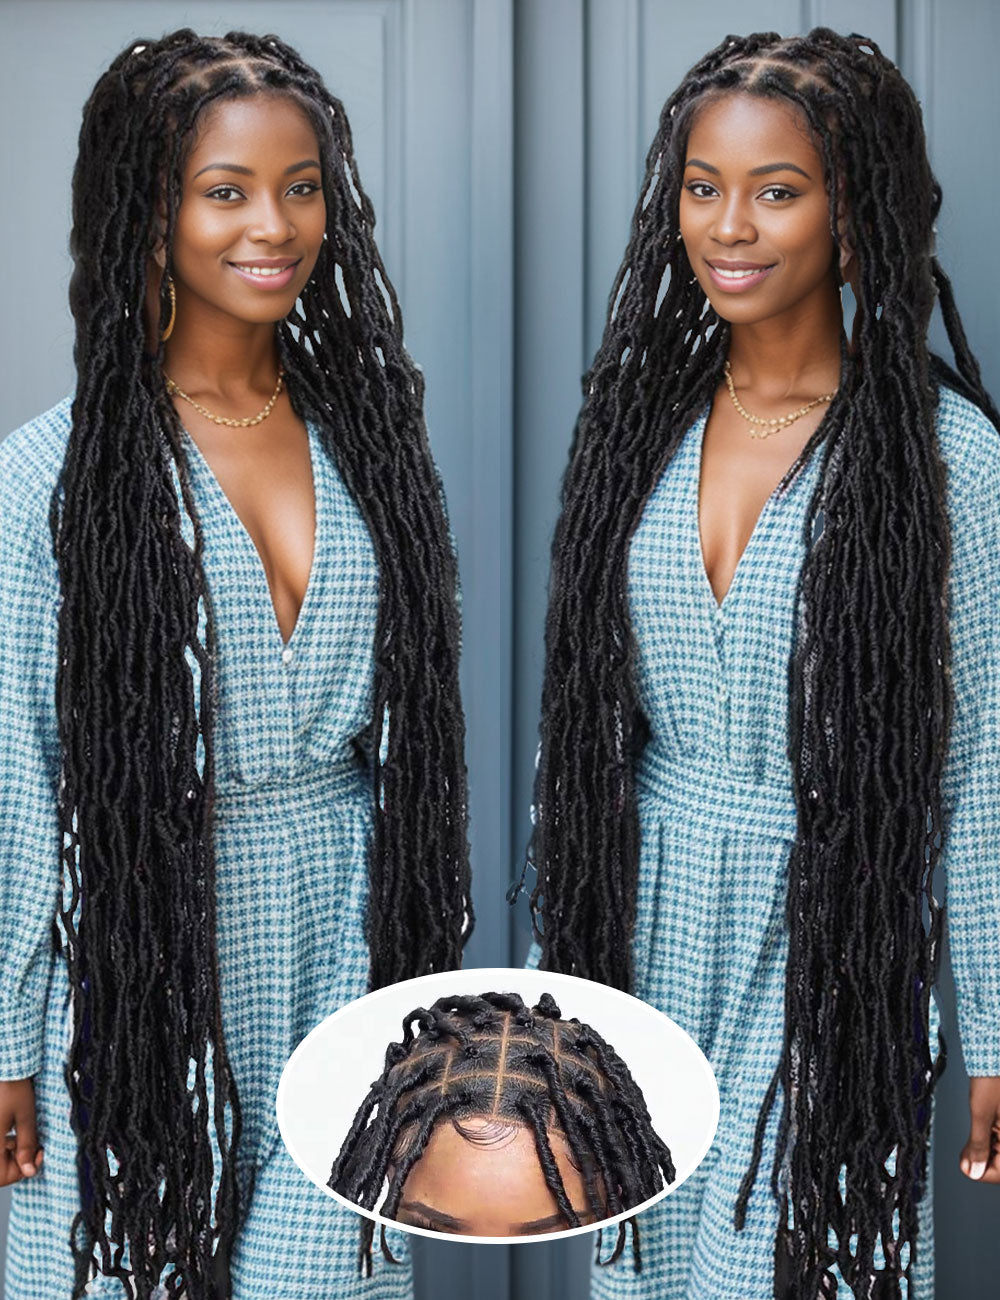 Sangtok 40 inch Extra Long Nu Faux Locs Knotless Braid Wig Embroidery 360 Full Lace Front Glueless Wig